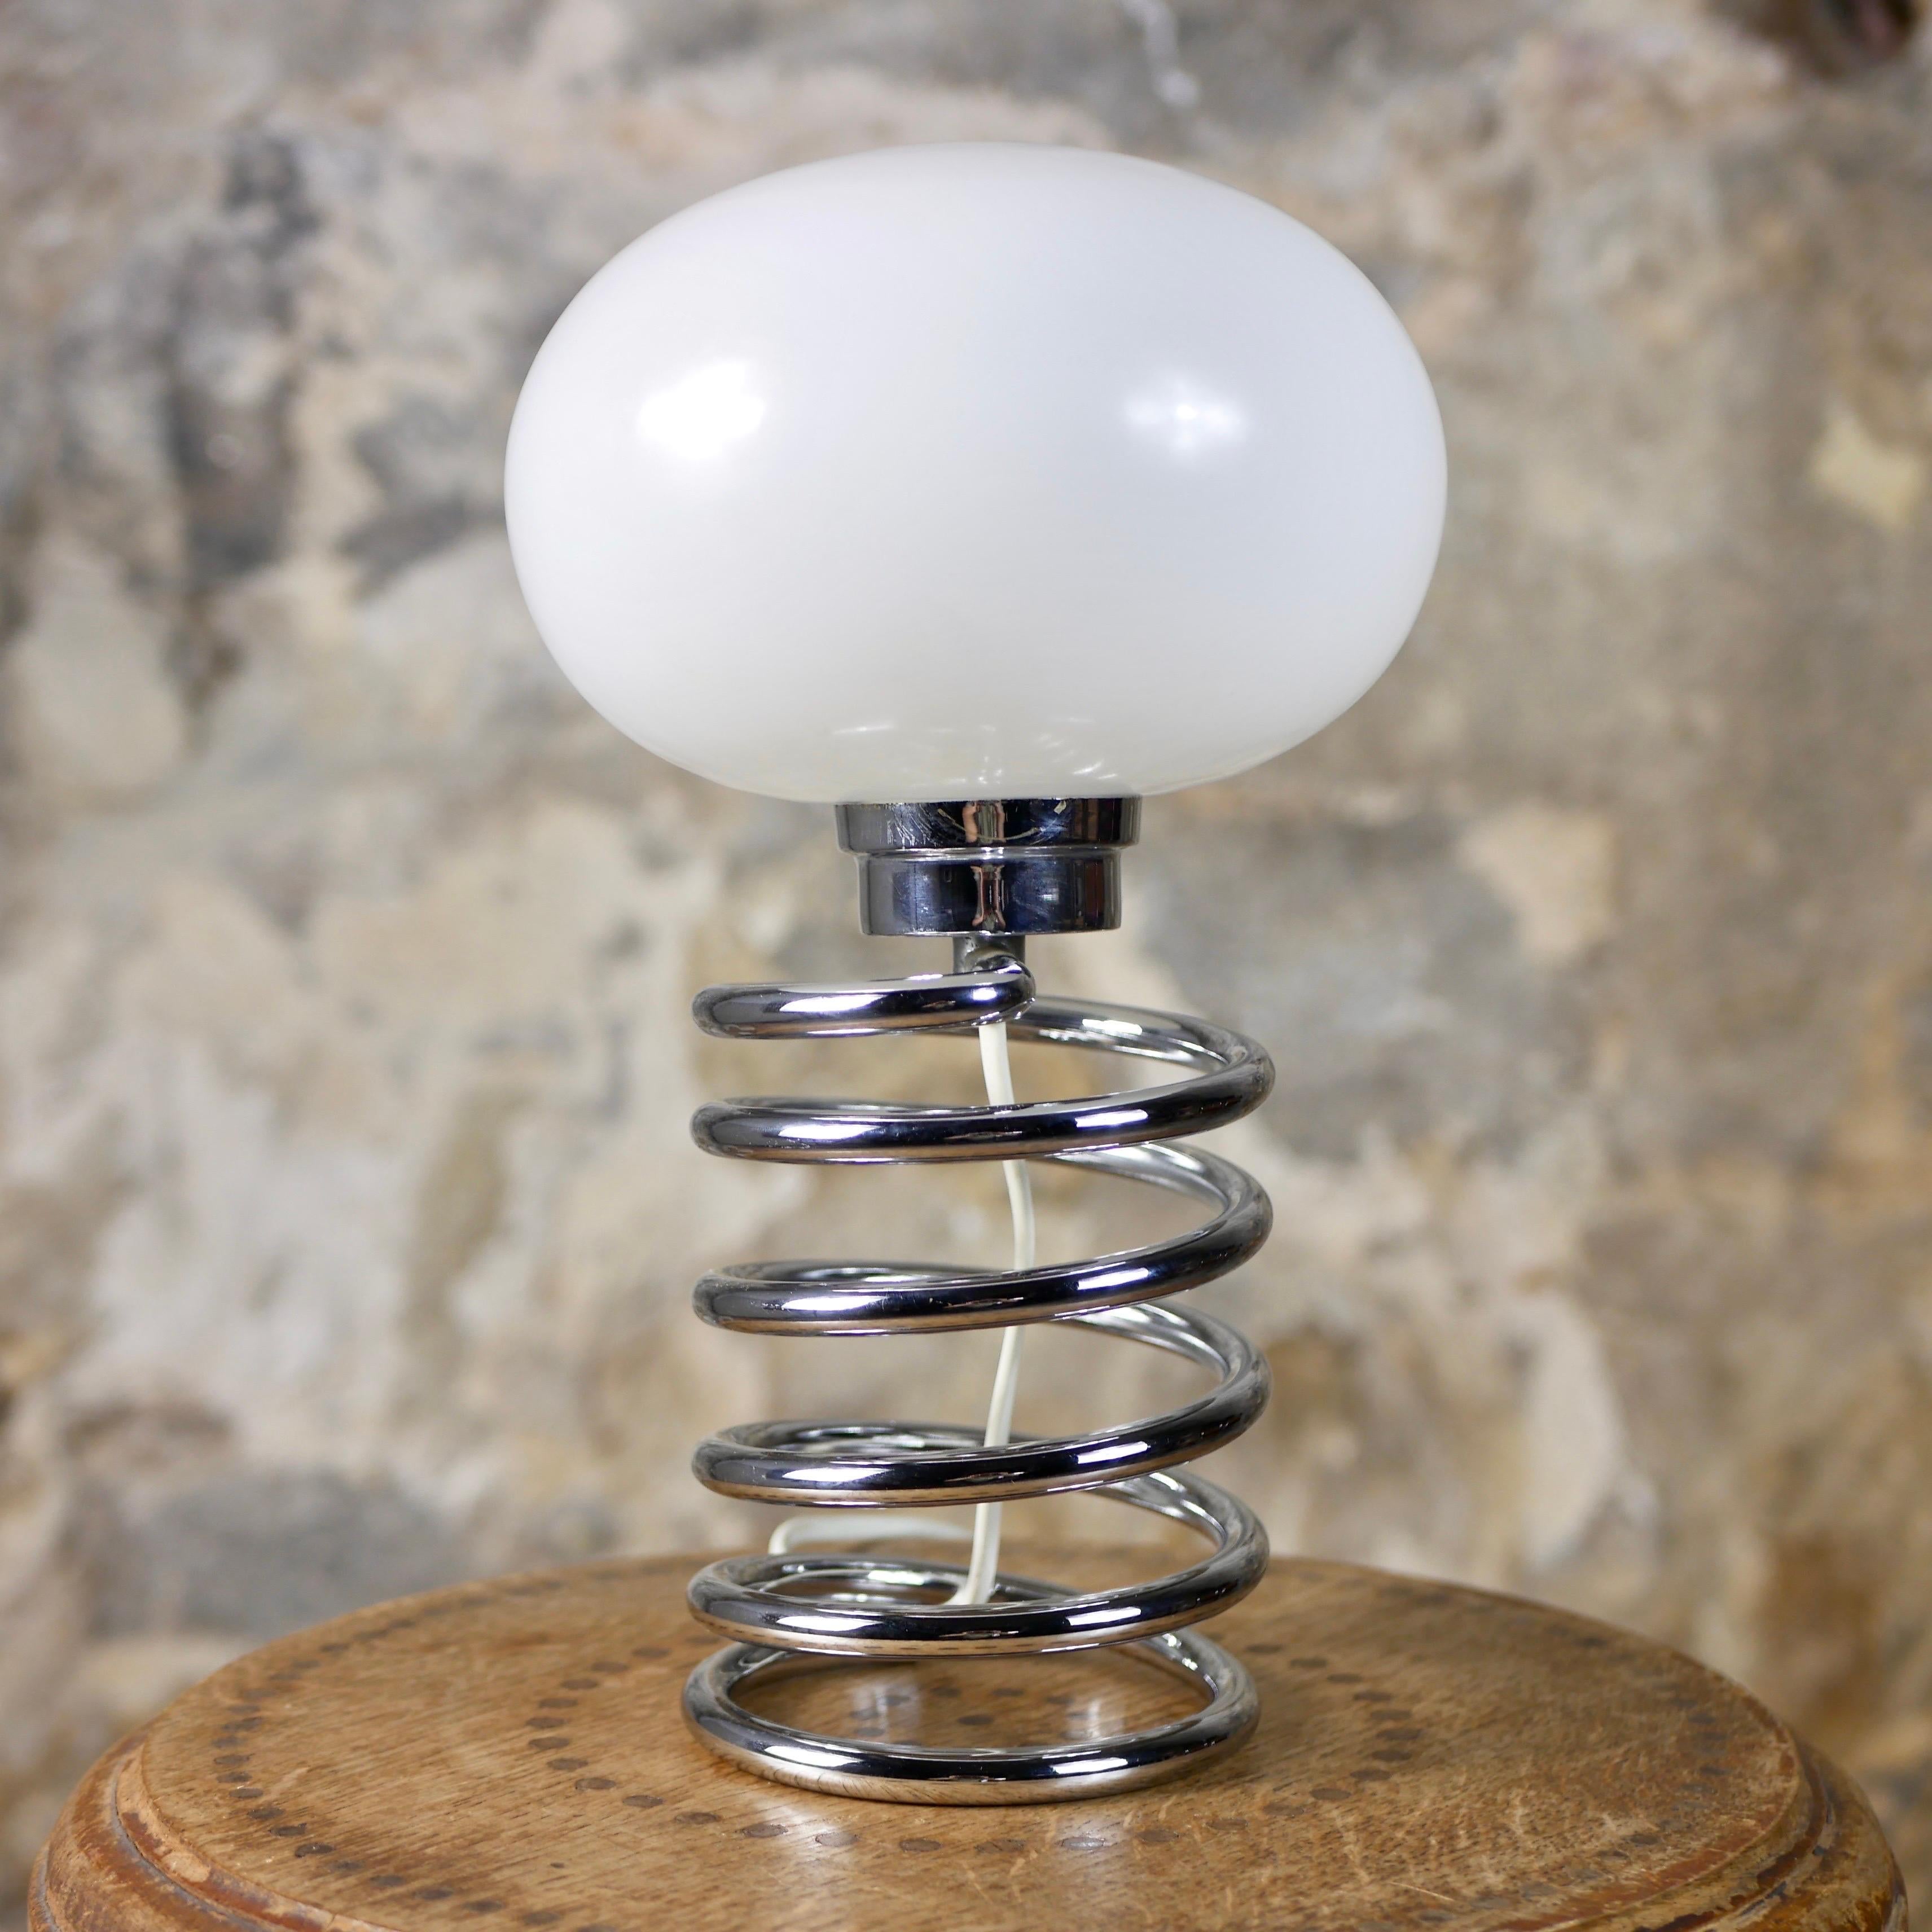 Adorable spring table lamp in chromed metal, model « Spirale » designed in the 1970s by Ingo Maurer for Design M, made in Germany.
Original opaline glass.
Very good condition.
Dimensions : D17, H30cm